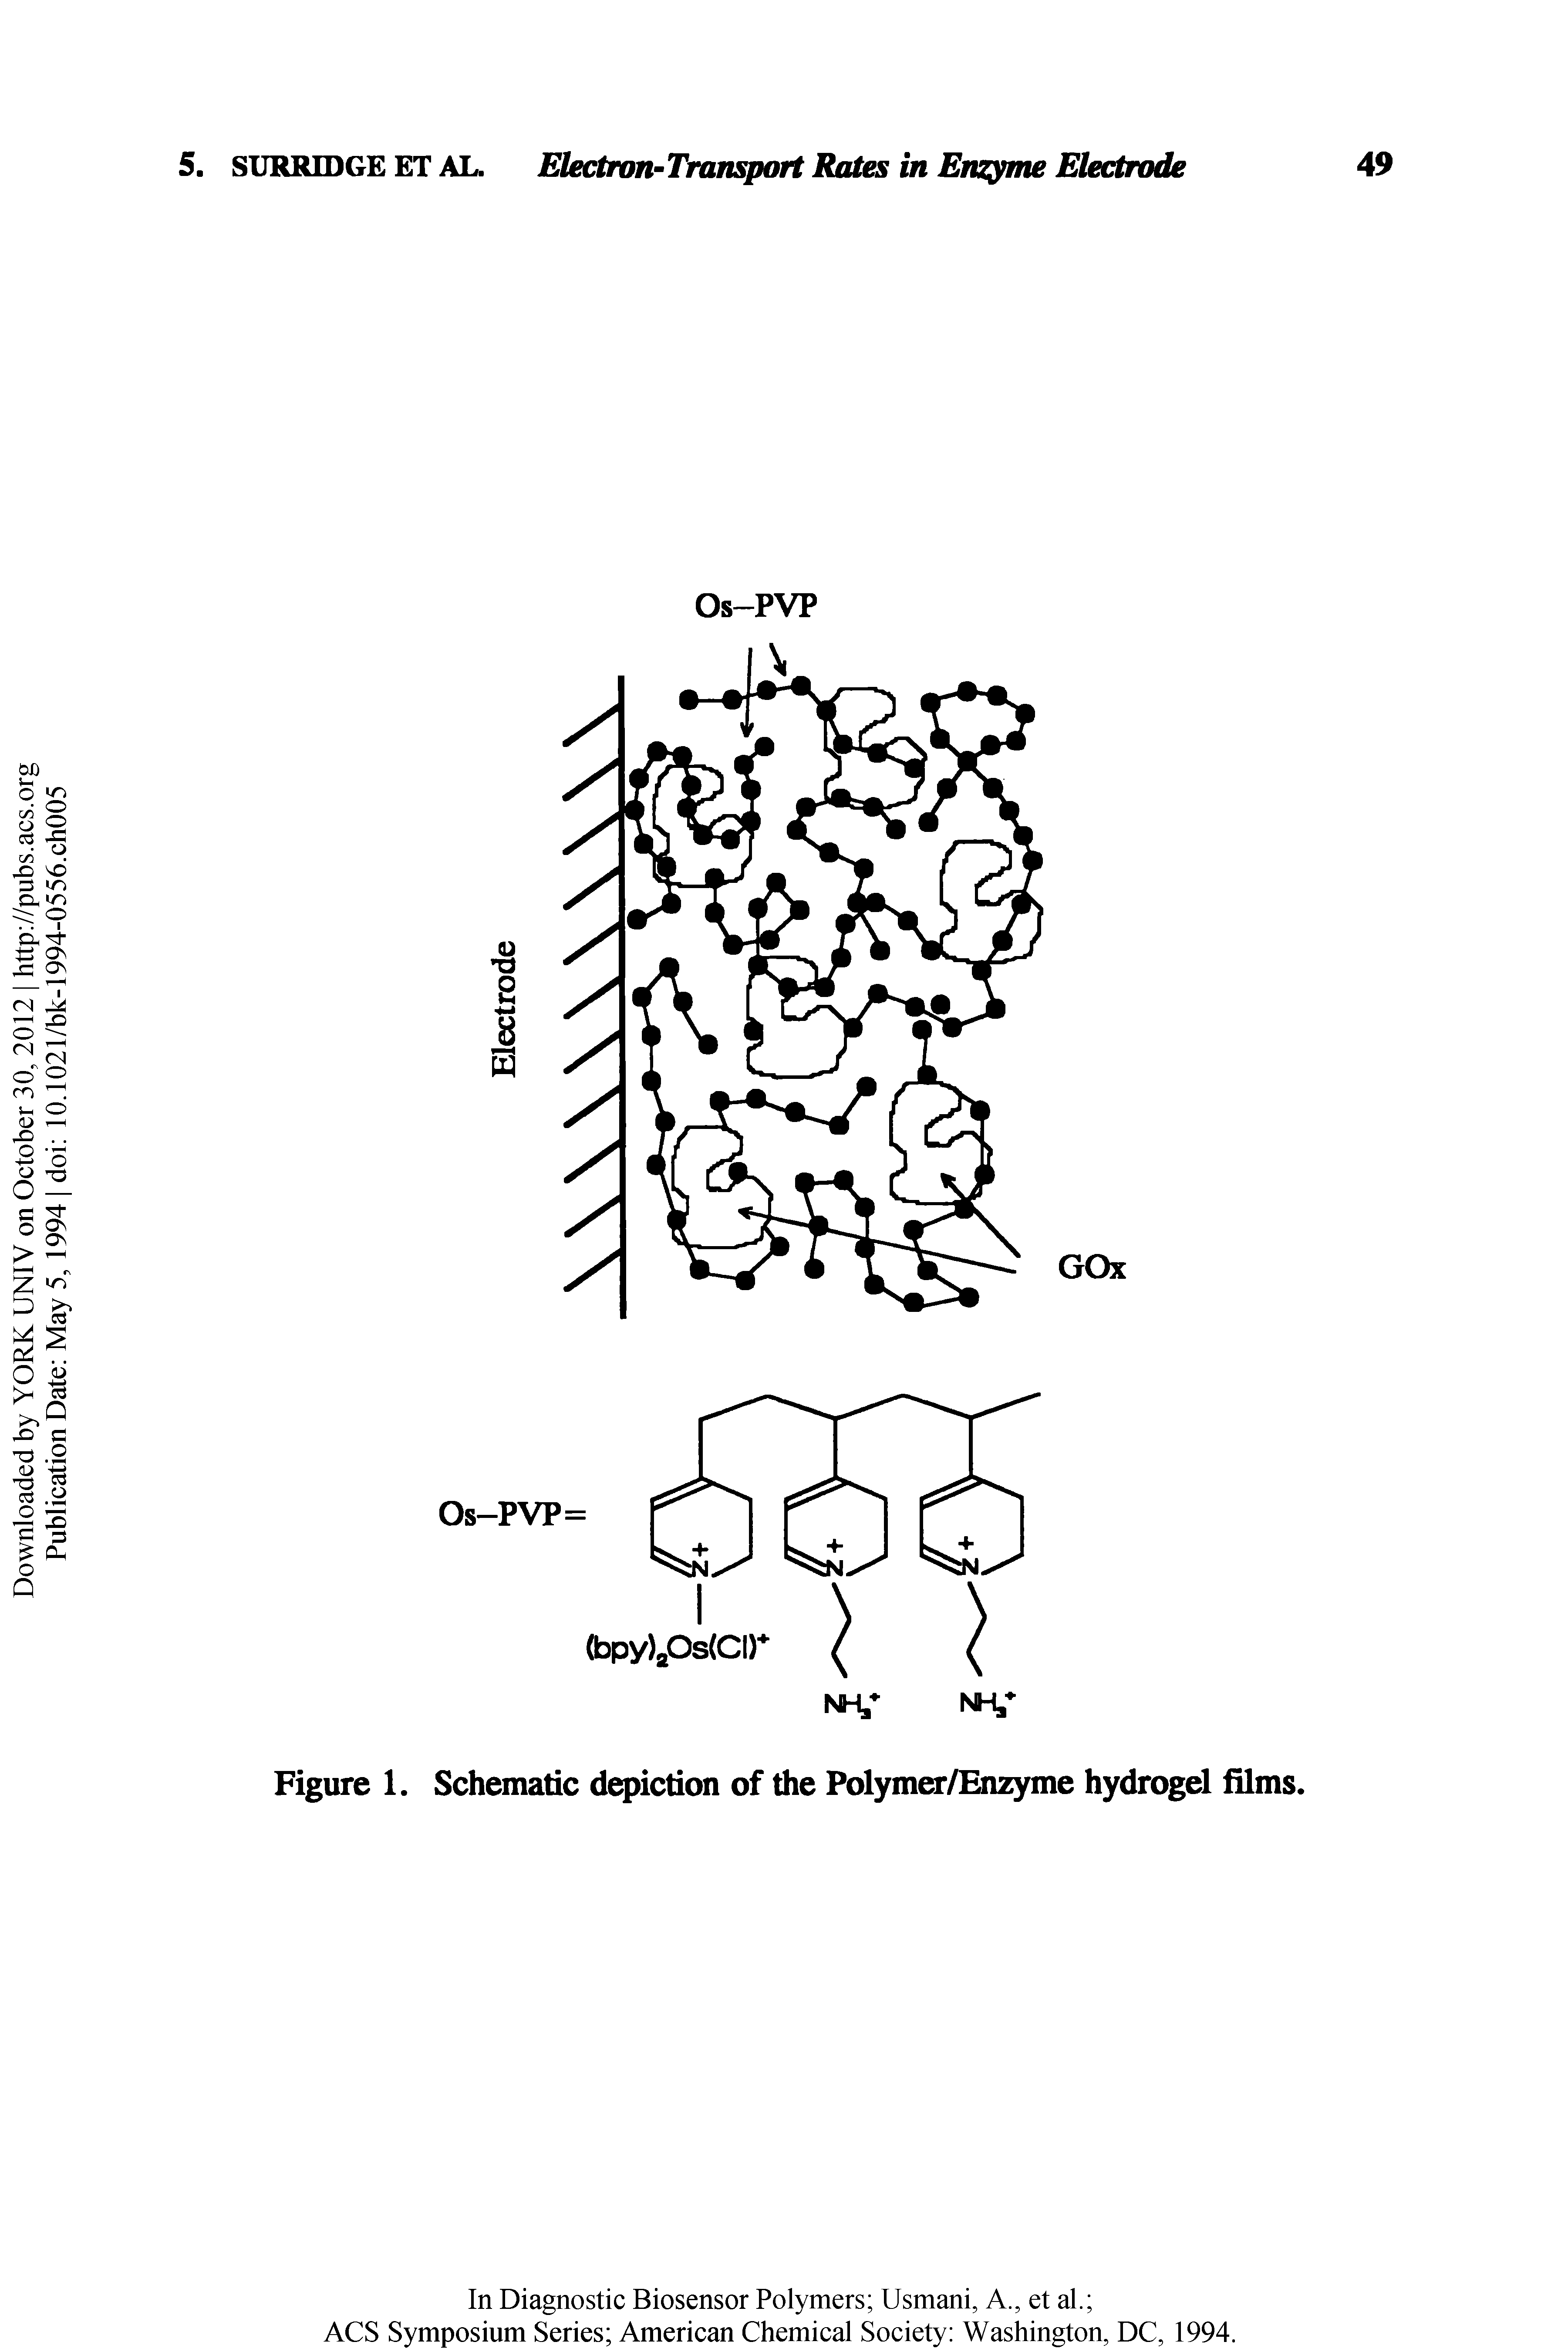 Figure 1. Schematic depiction of the Polymer/Enzyme hydrogel films.